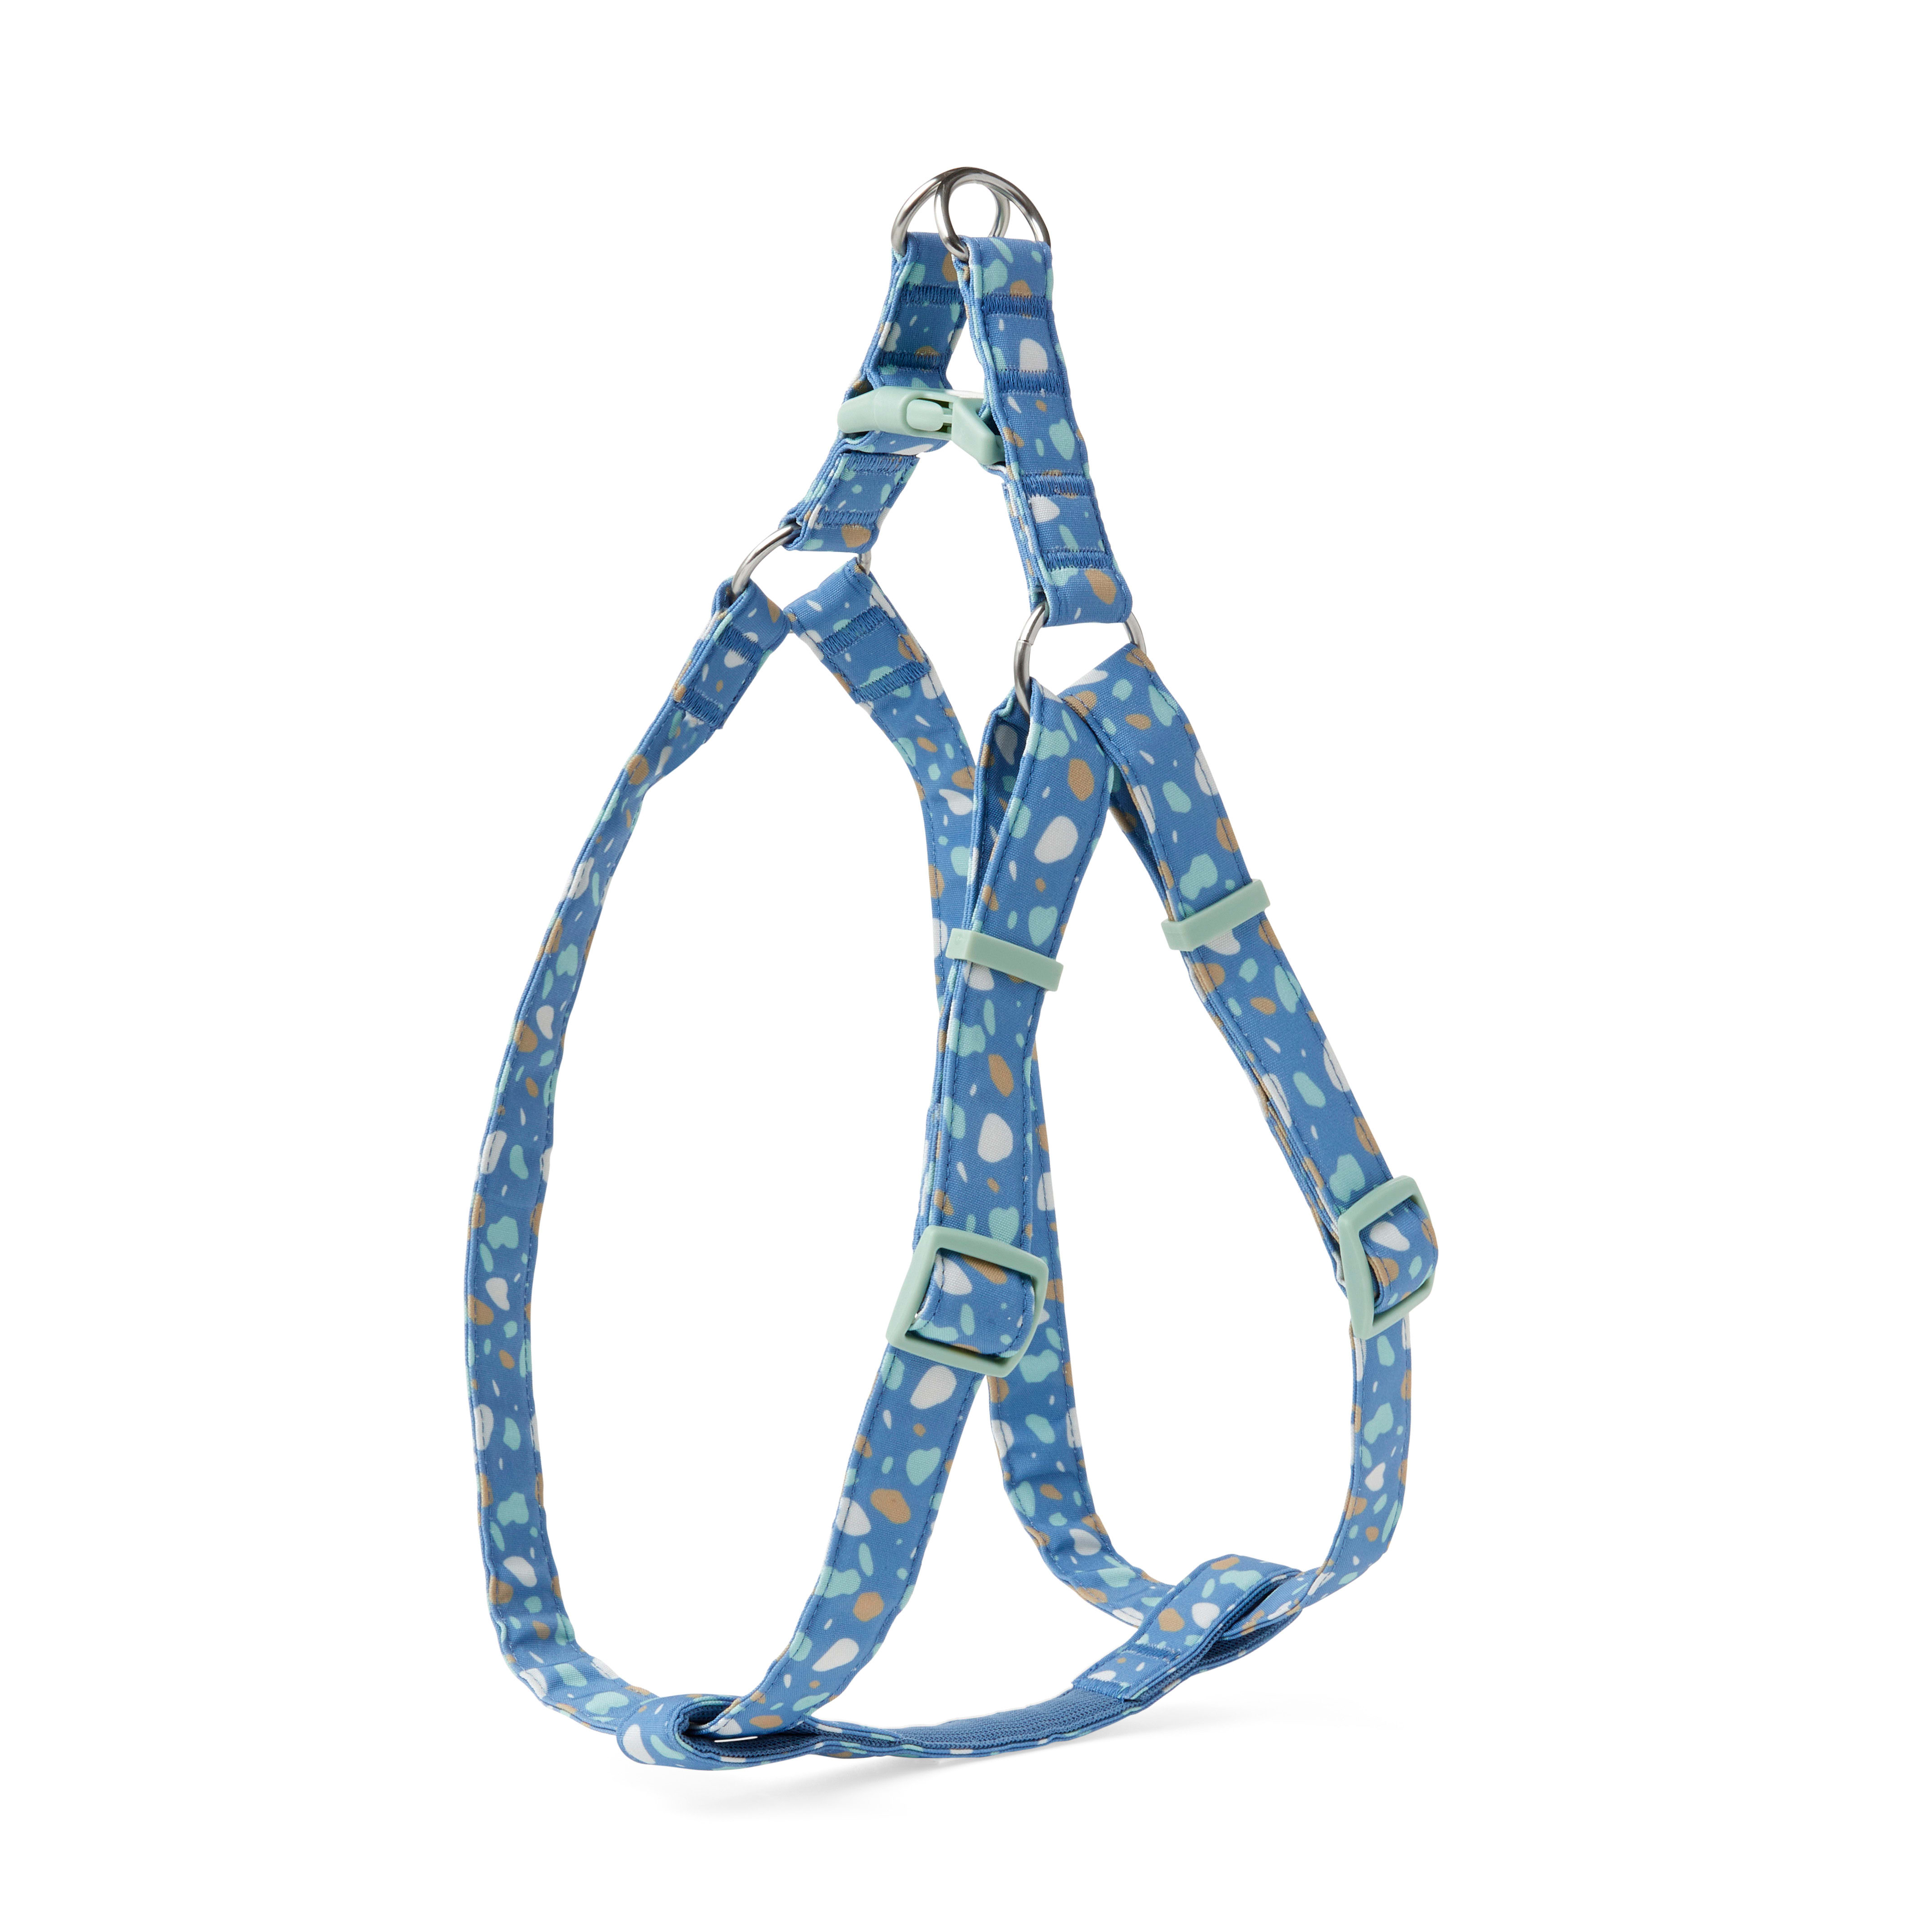 YOULY The Artist Blue & Multicolor Paint Splatter Dog Harness, Large/X ...